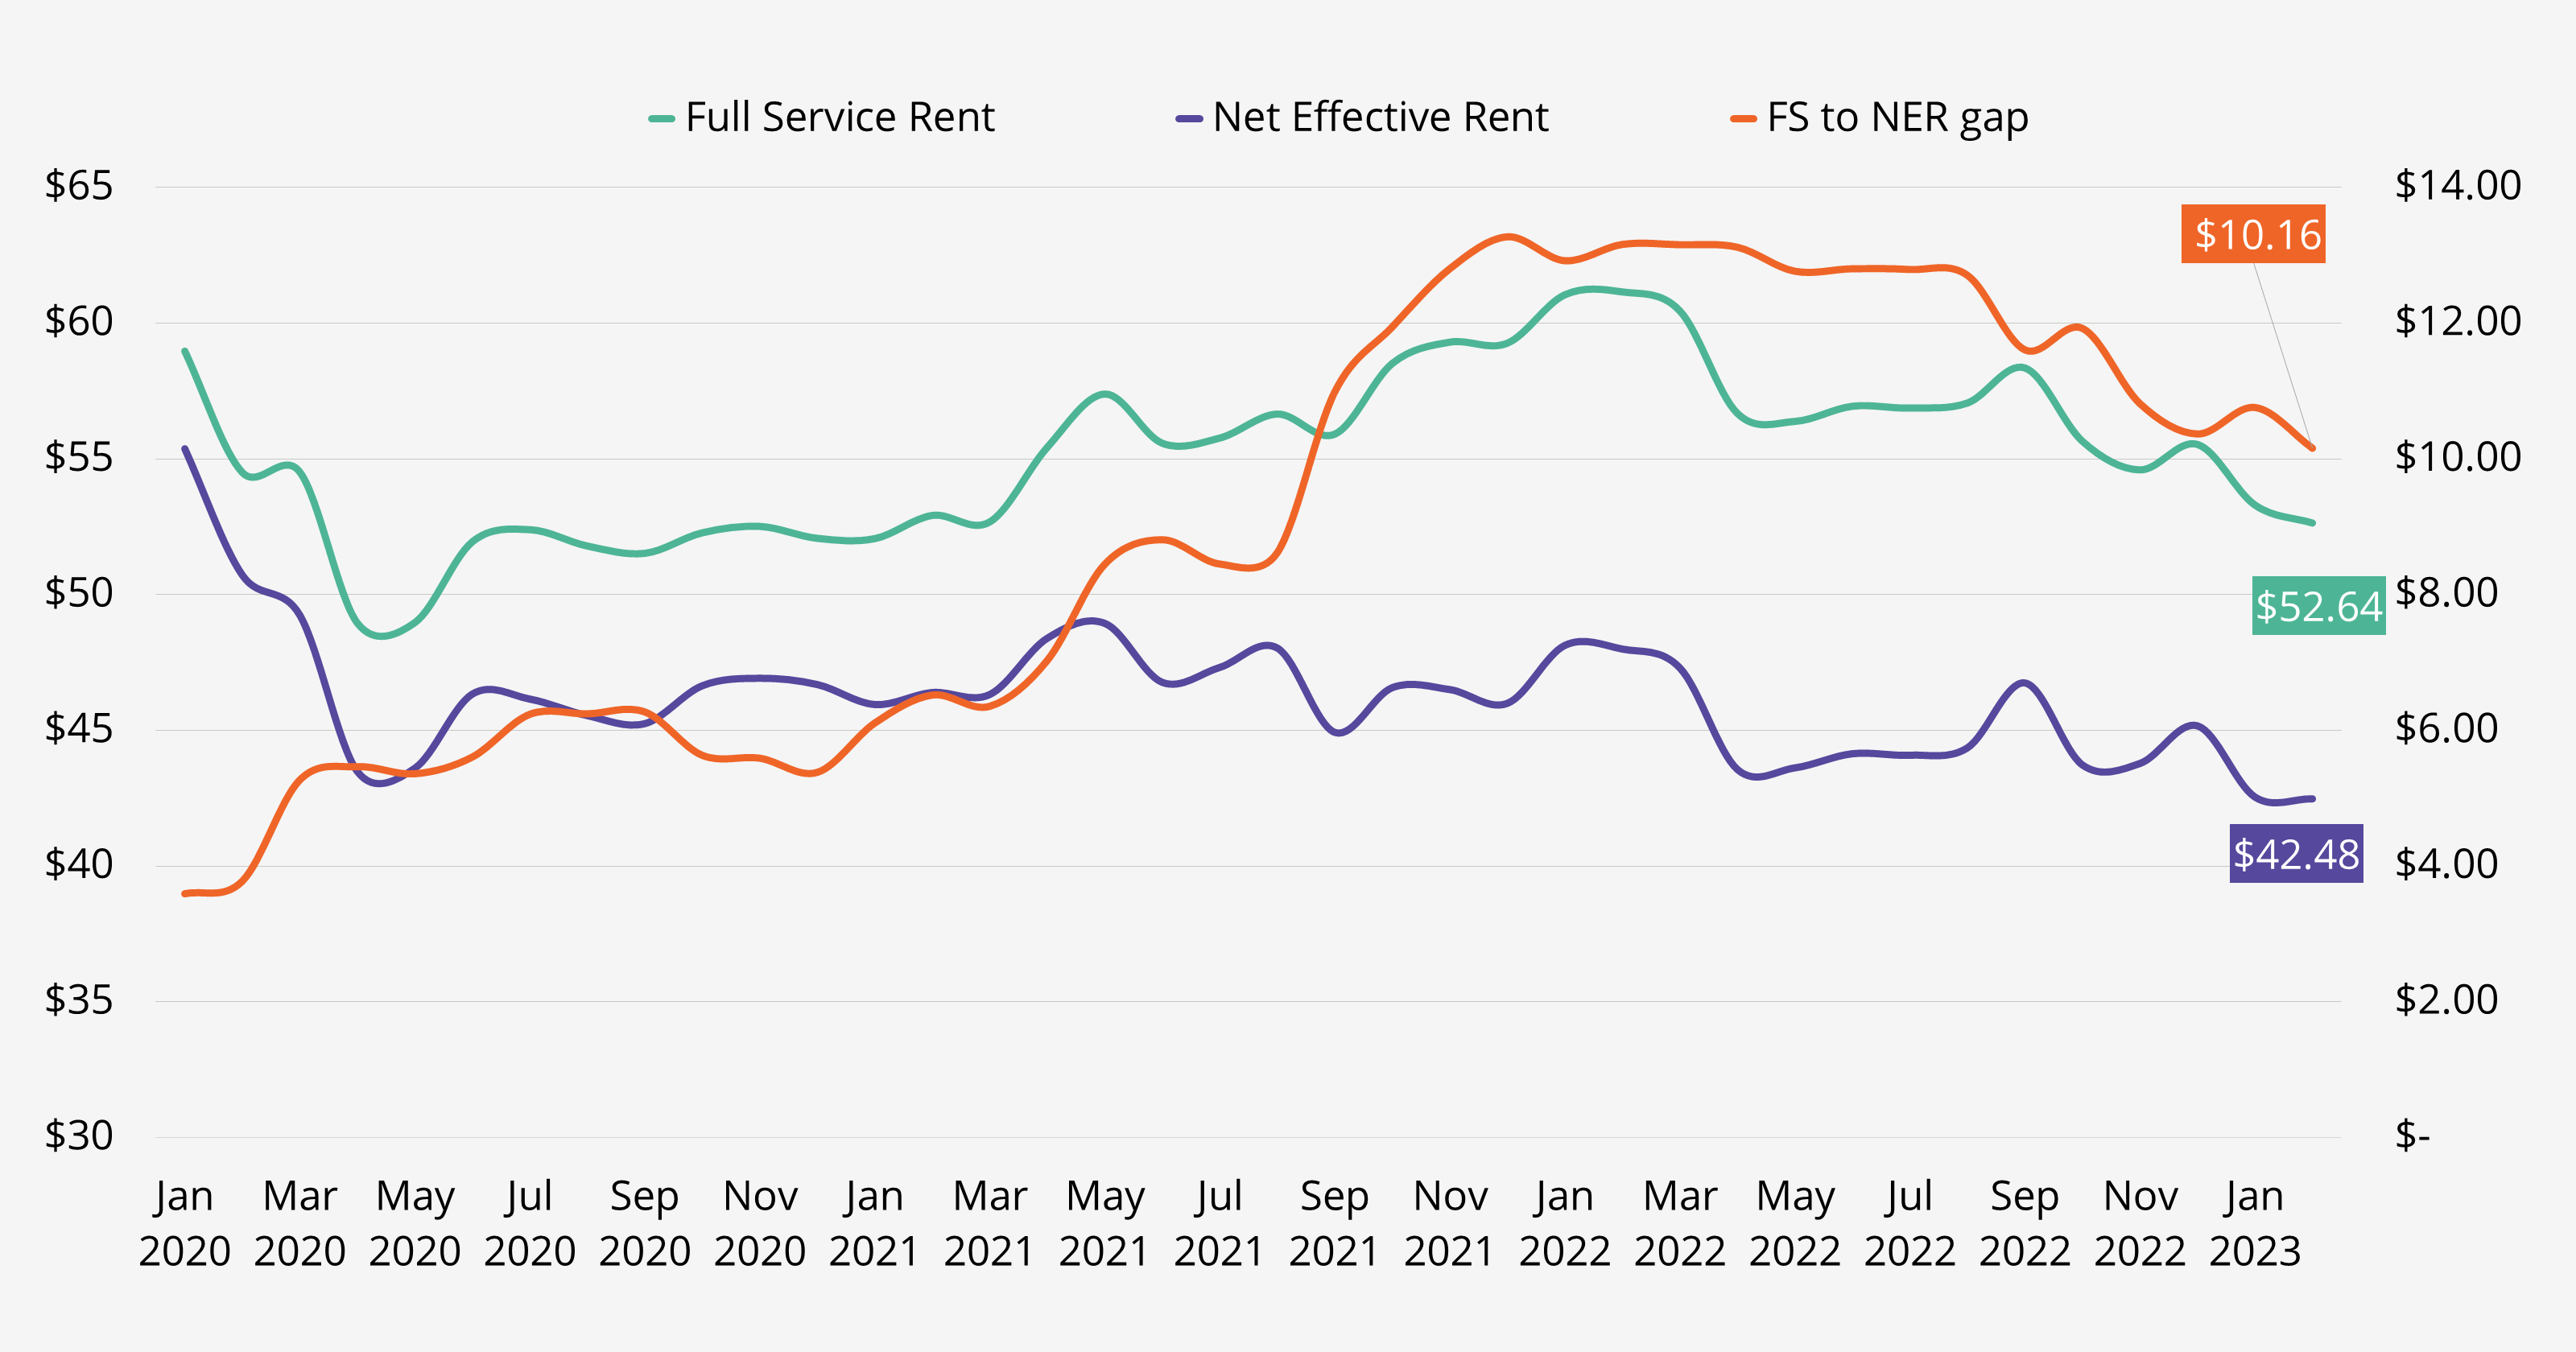 Chart showing full service rent, net effective rent and the gap between the two values from January 2020 through January 2023